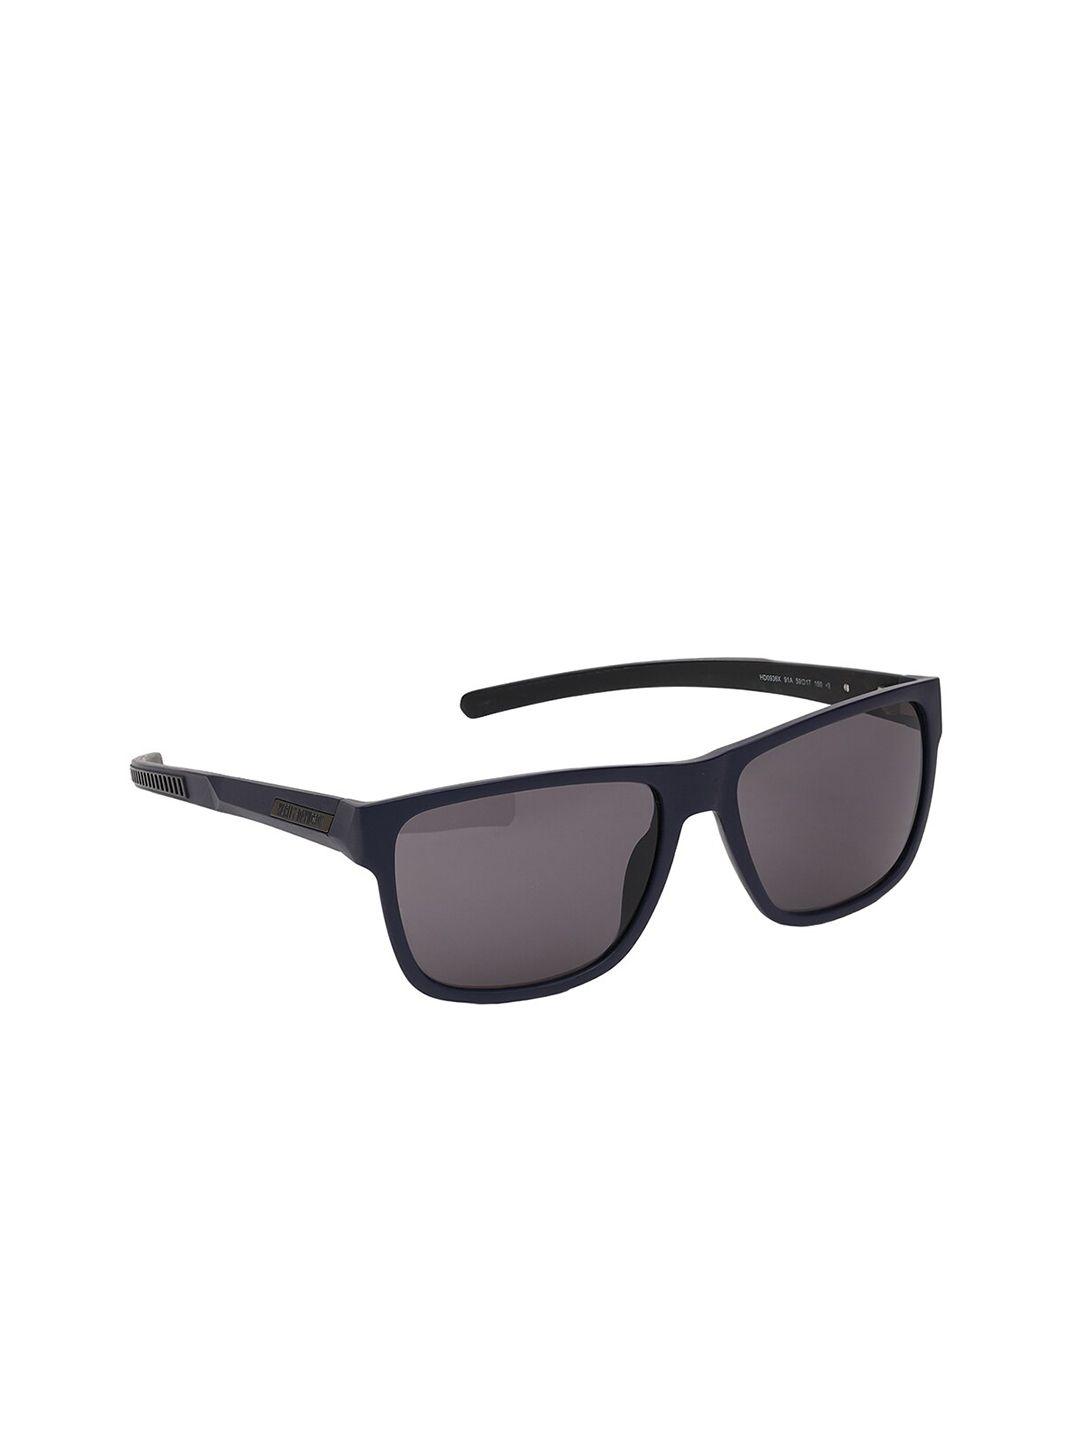 harley-davidson men rectangle sunglasses with uv protected lens